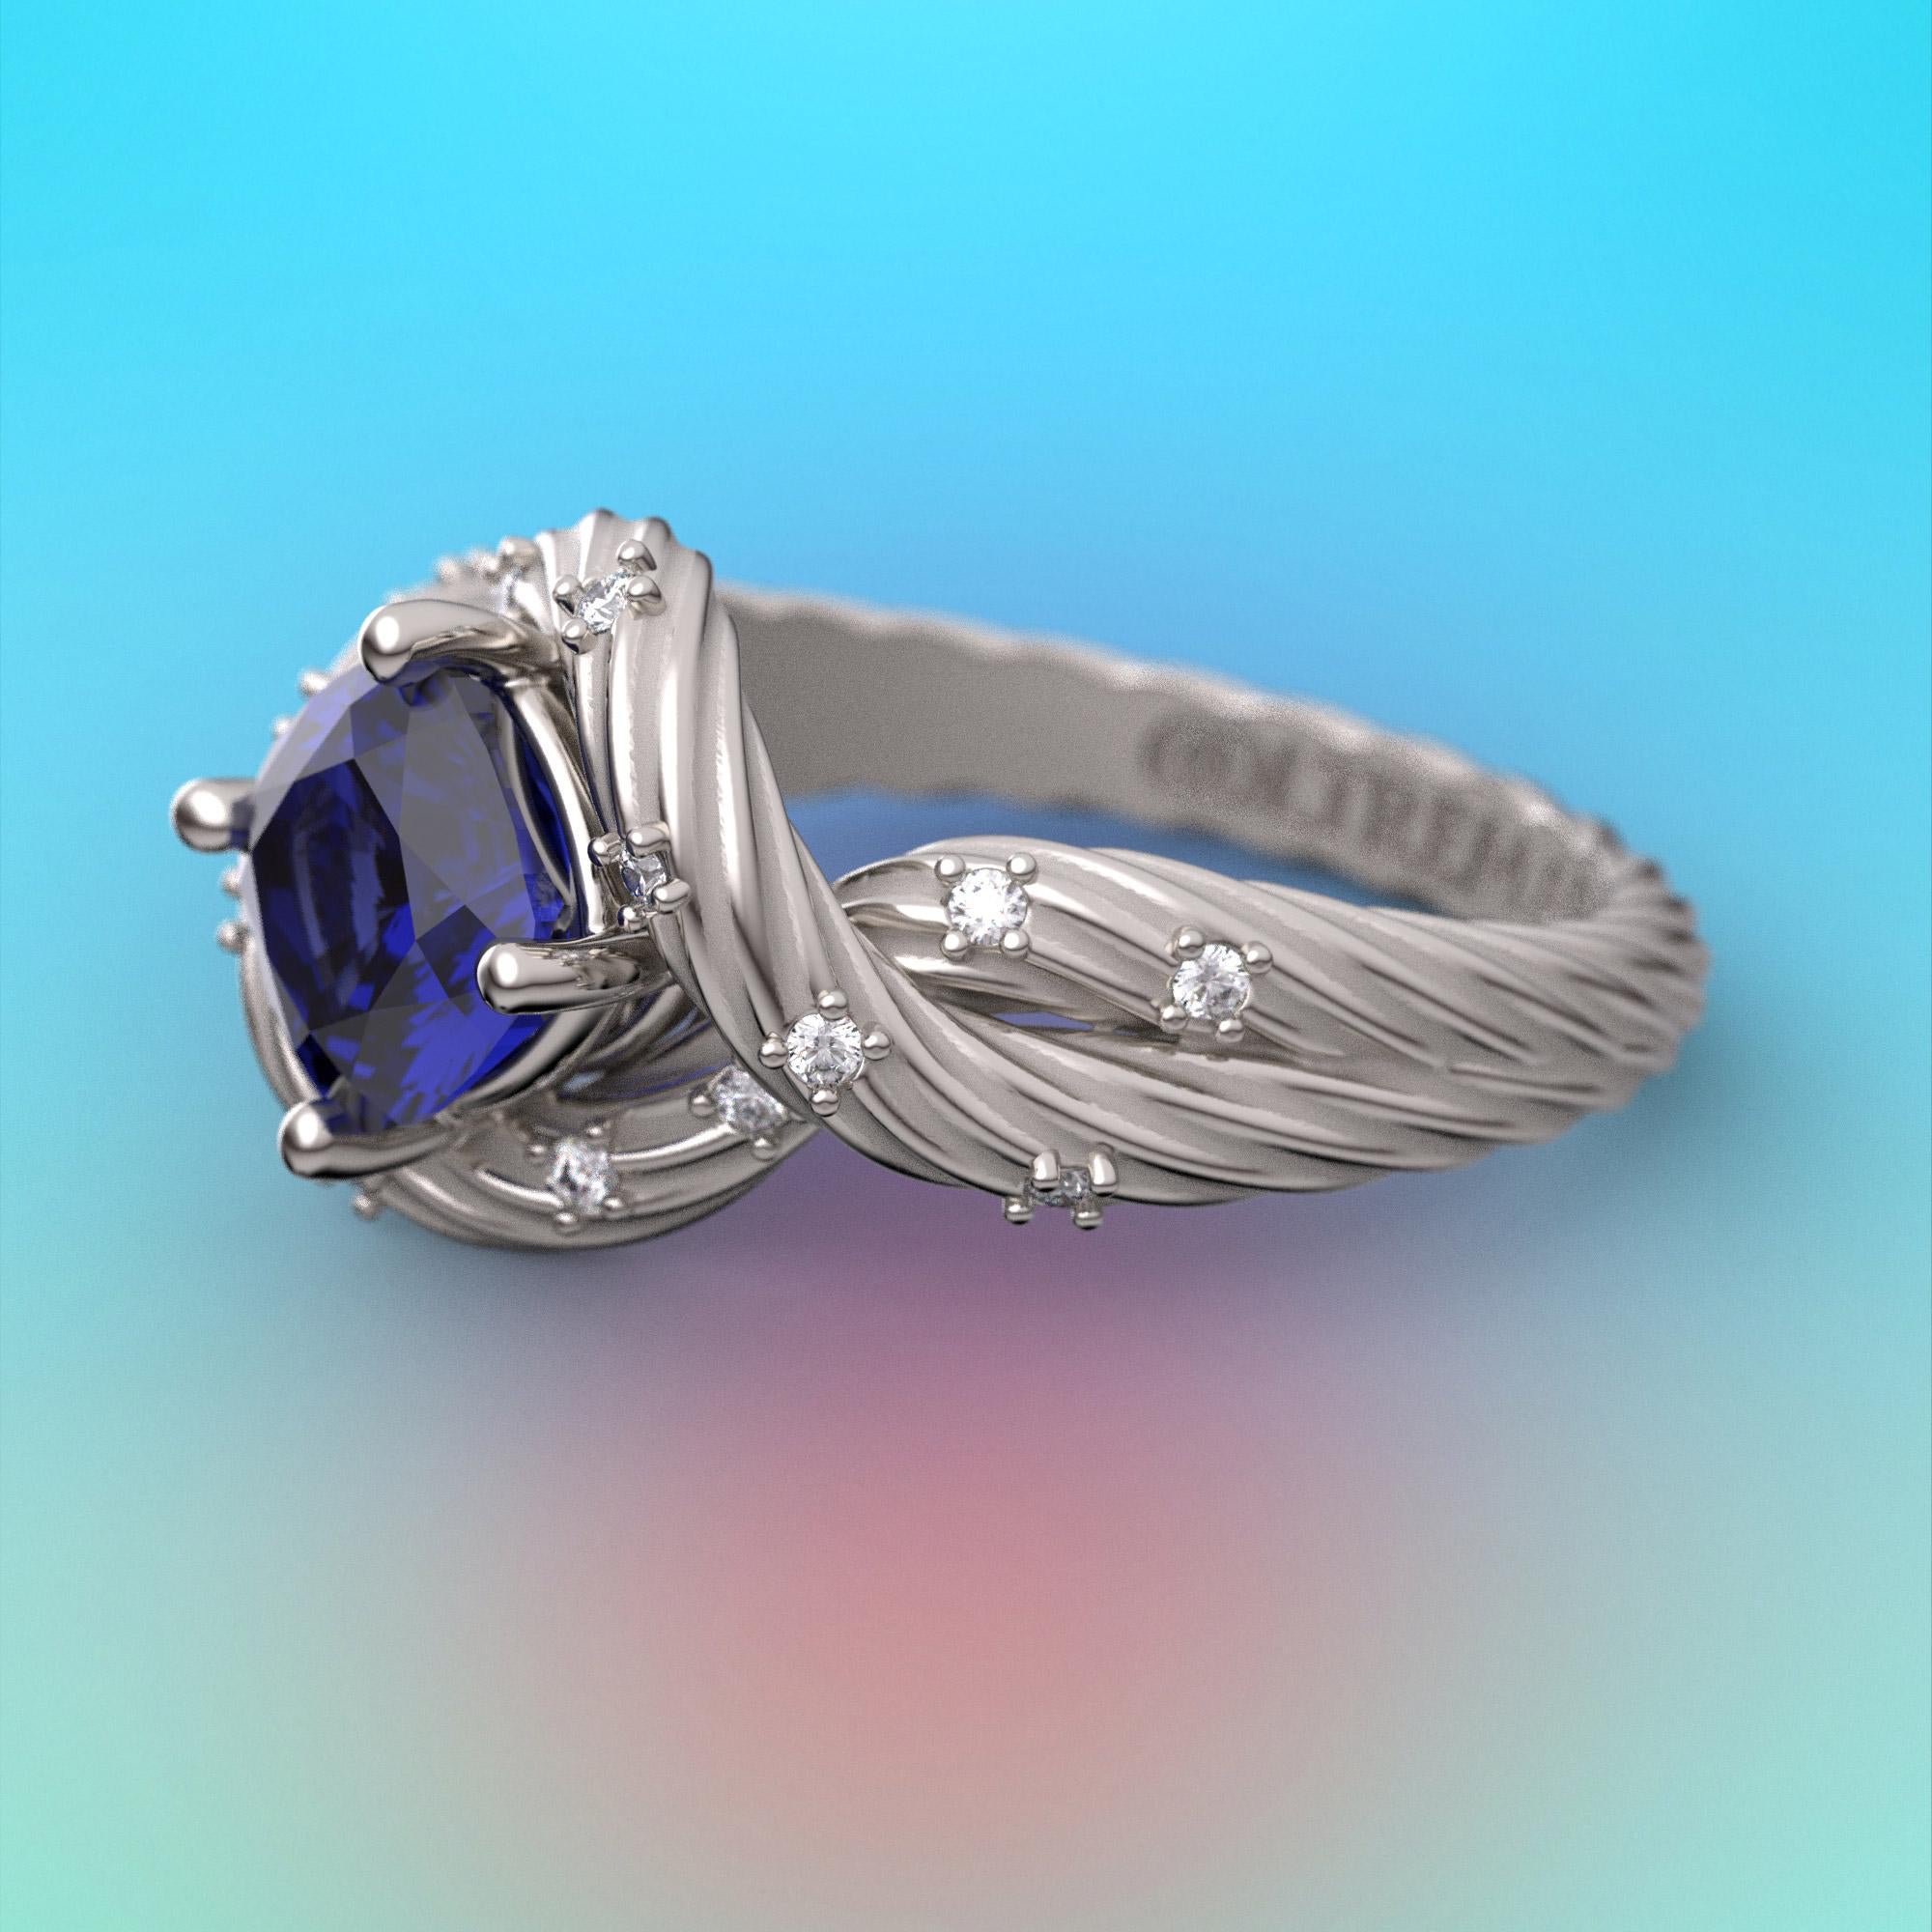 For Sale:  Tanzanite and Diamonds Ring 14k Solid Gold, Italian Fine Jewelry, made to order. 18